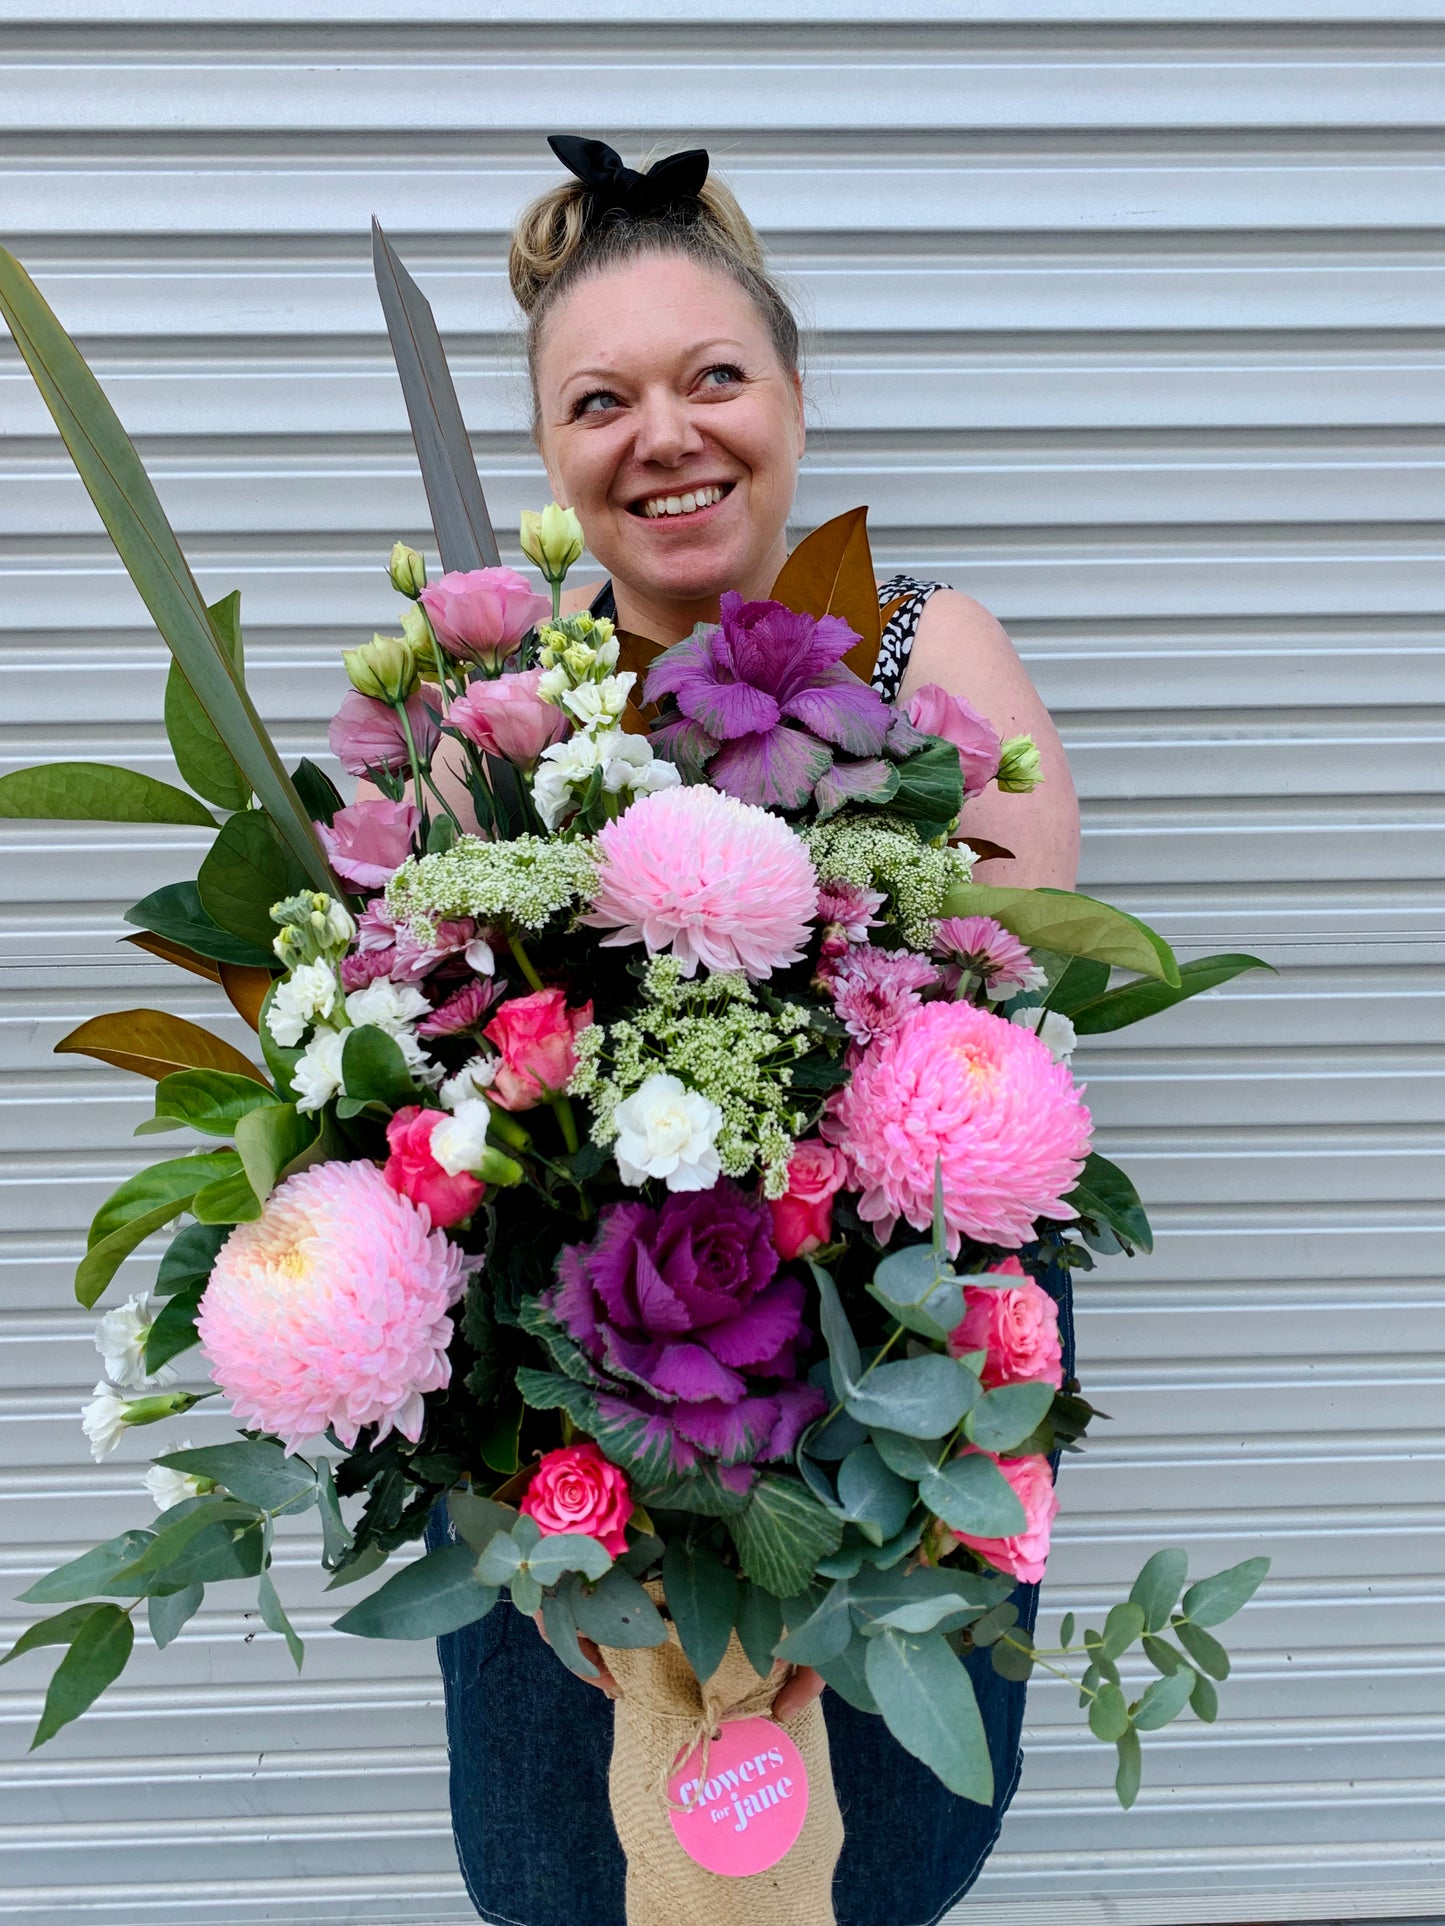 Who is behind Melbourne online florist "Flowers for Jane"